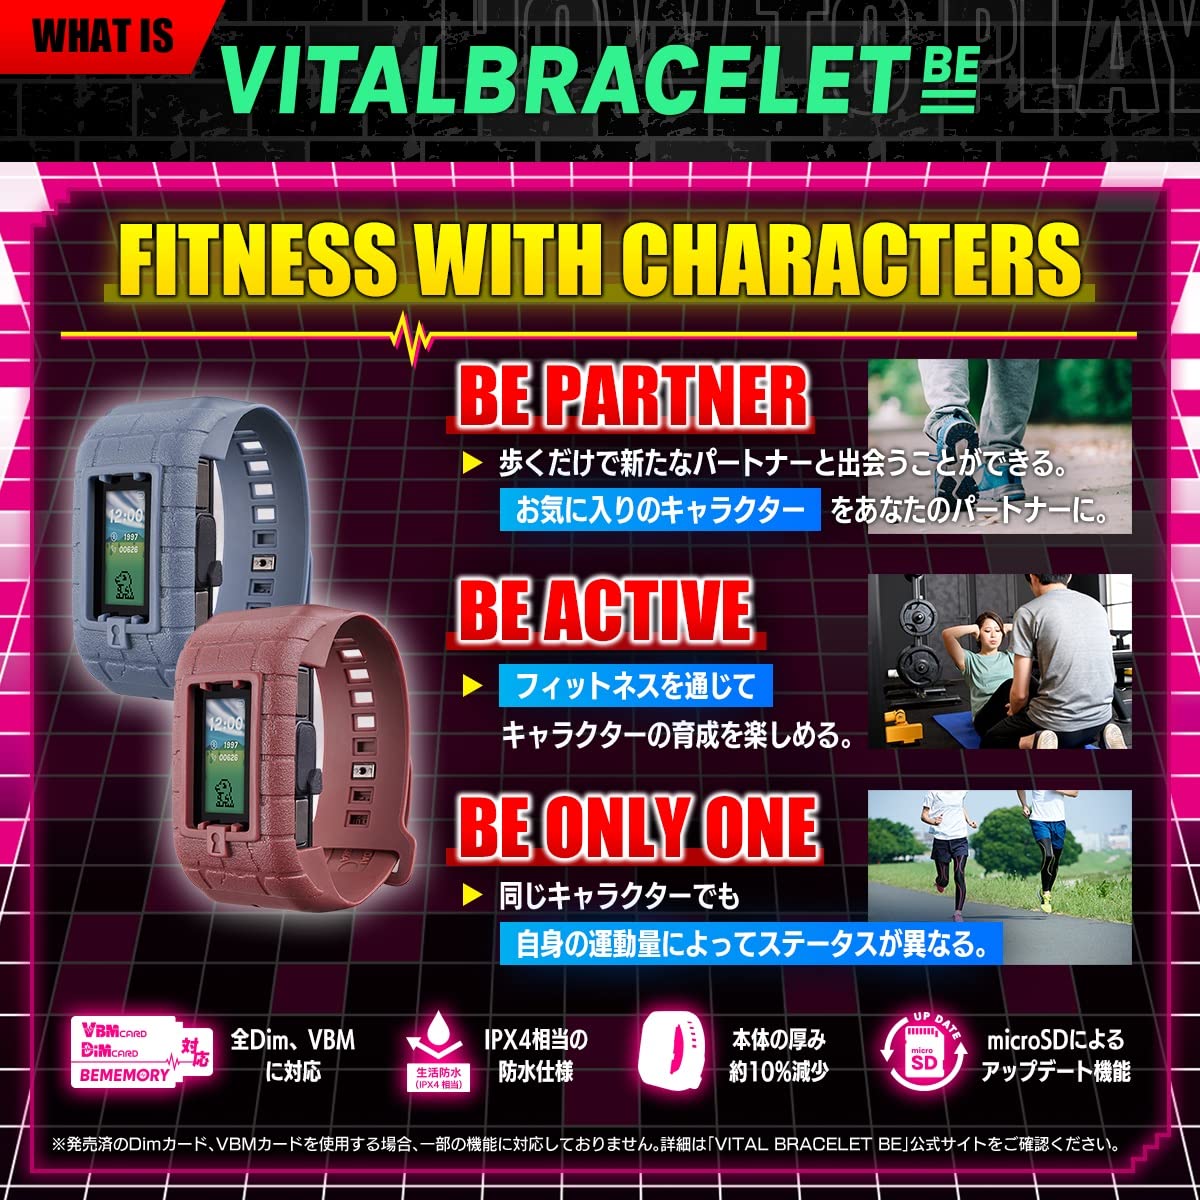 Bandai Vital Bracelet BE Digital Monster 25th Anniversary Set | Vital Bracelet Digital Pet Watch with Memory Card Included Based On Digimon Anime | Train Your Virtual Pet Using This Fitness Tracker